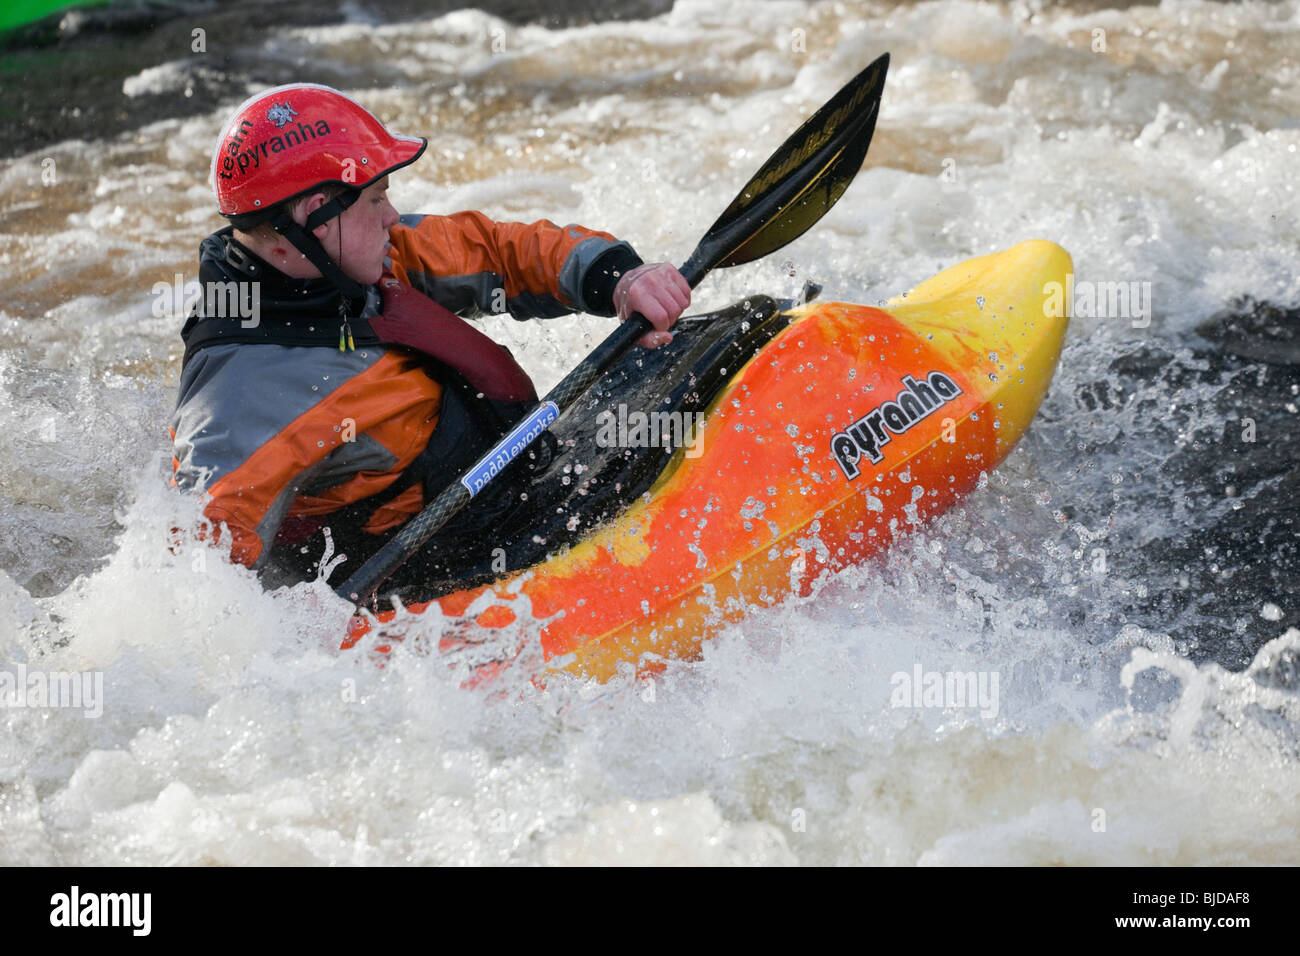 Kayaker kayaking in white water on Tryweryn River. National Whitewater Centre, Frongoch, Gwynedd, North Wales, UK. Stock Photo